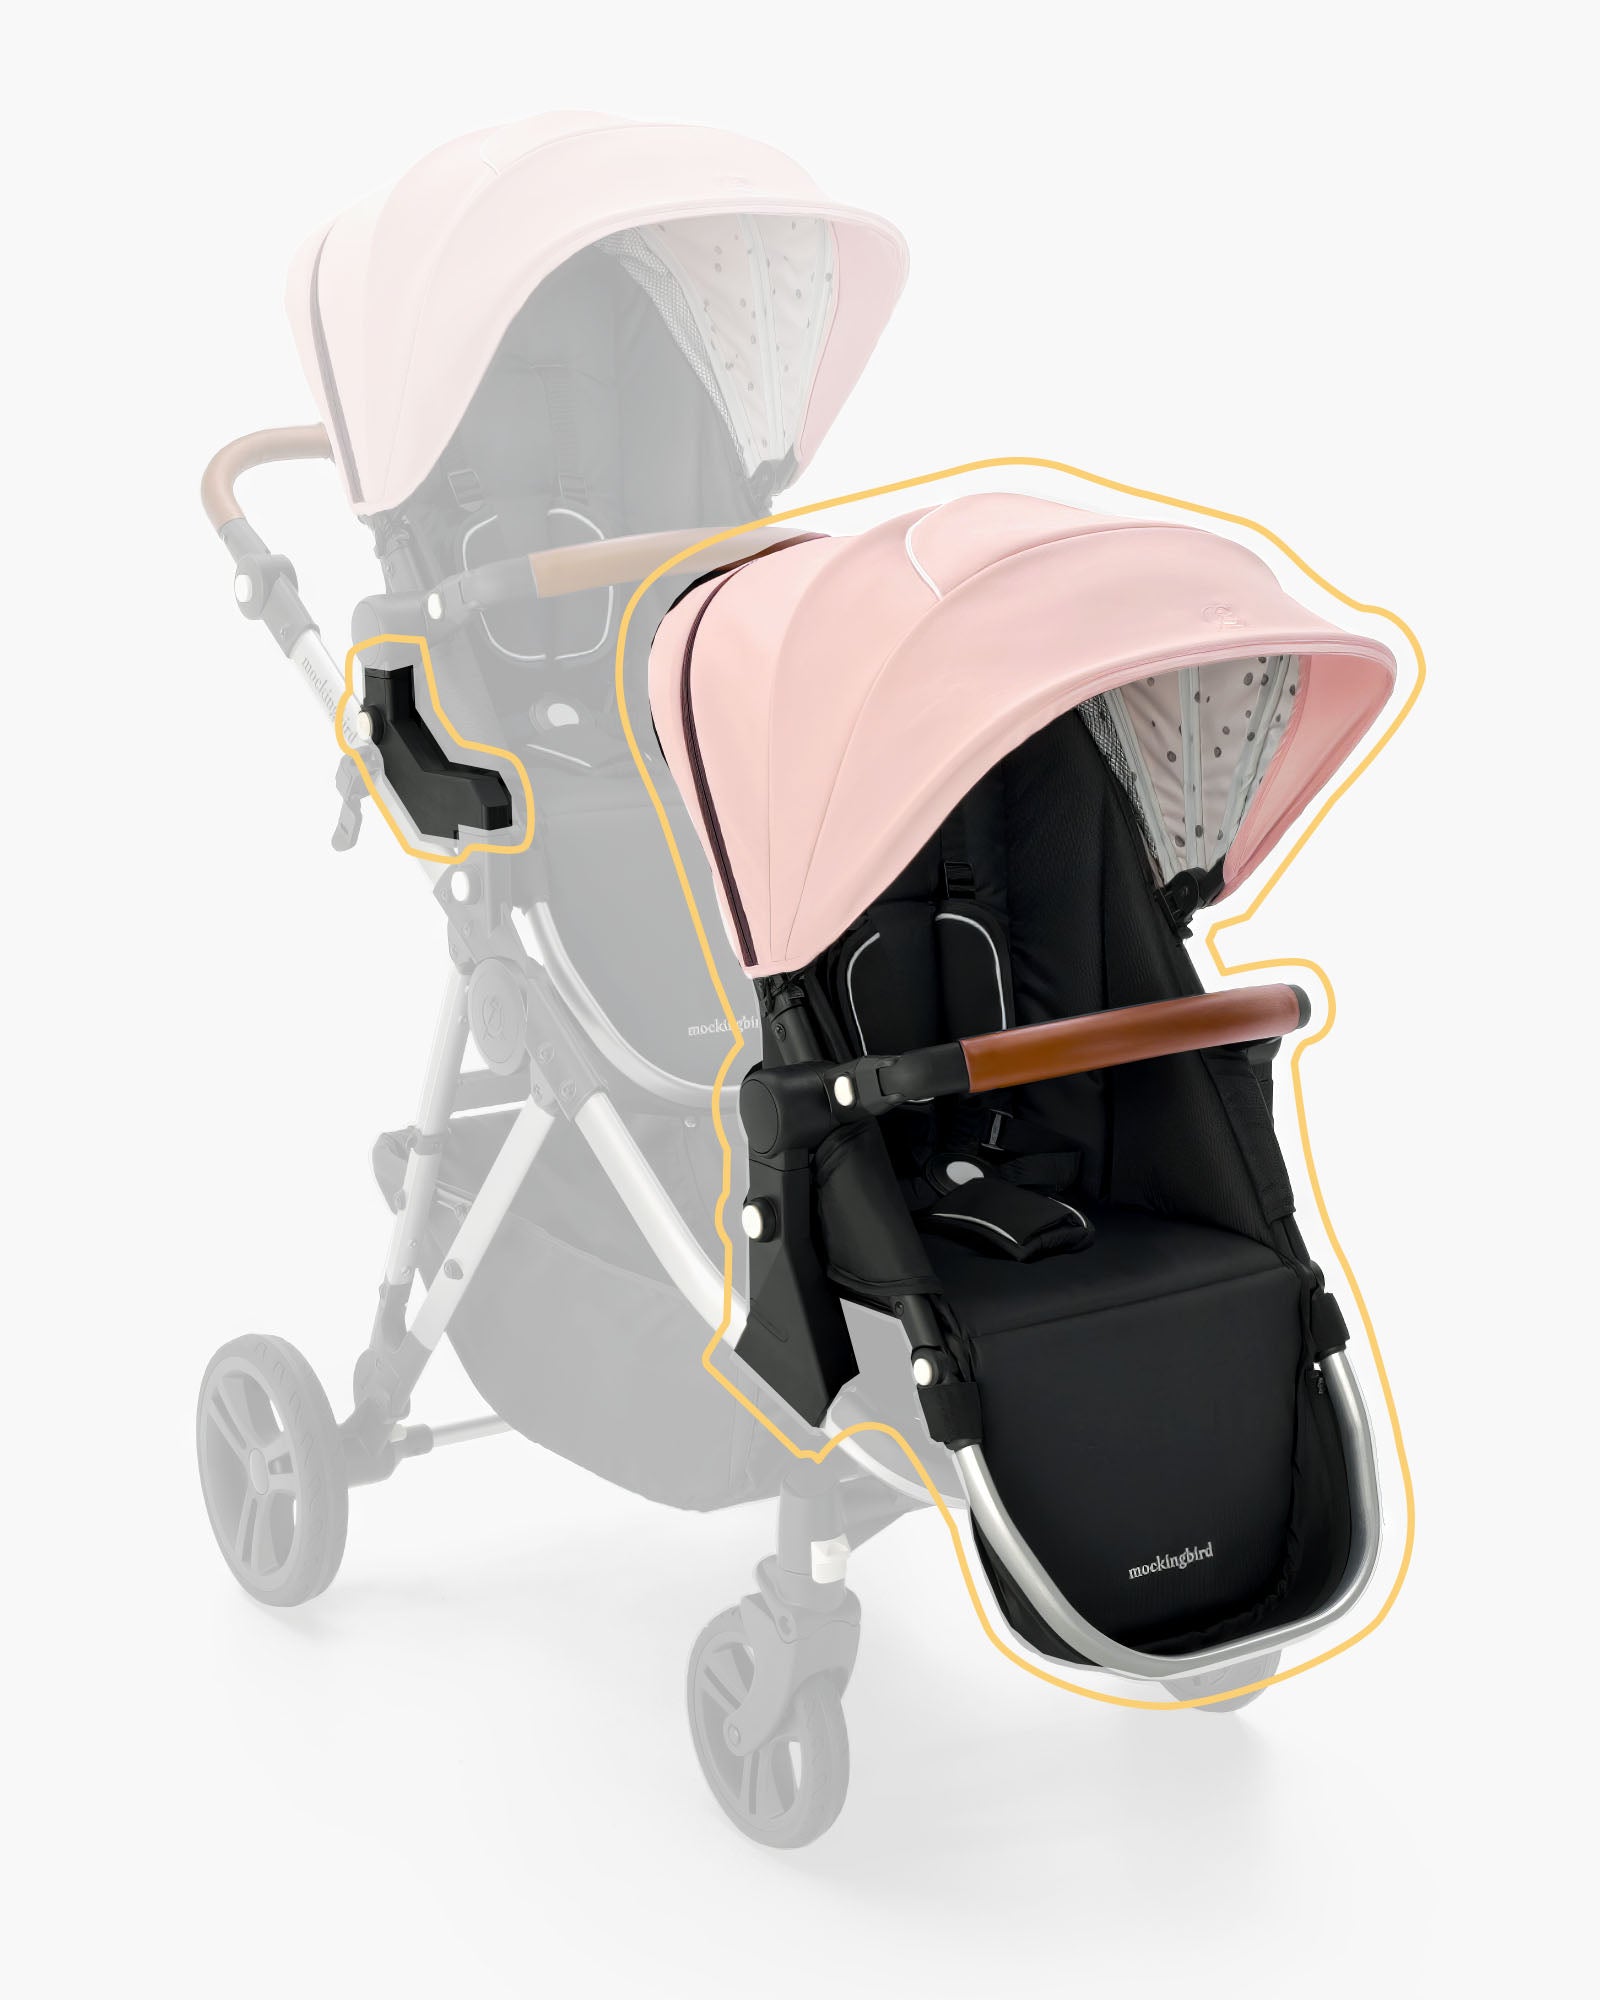 A modern baby stroller in blush pink with a reversible seat and extendable canopy, isolated on a white background - the 2nd Seat Kit 2.0 by mockingbird. #color_bloom